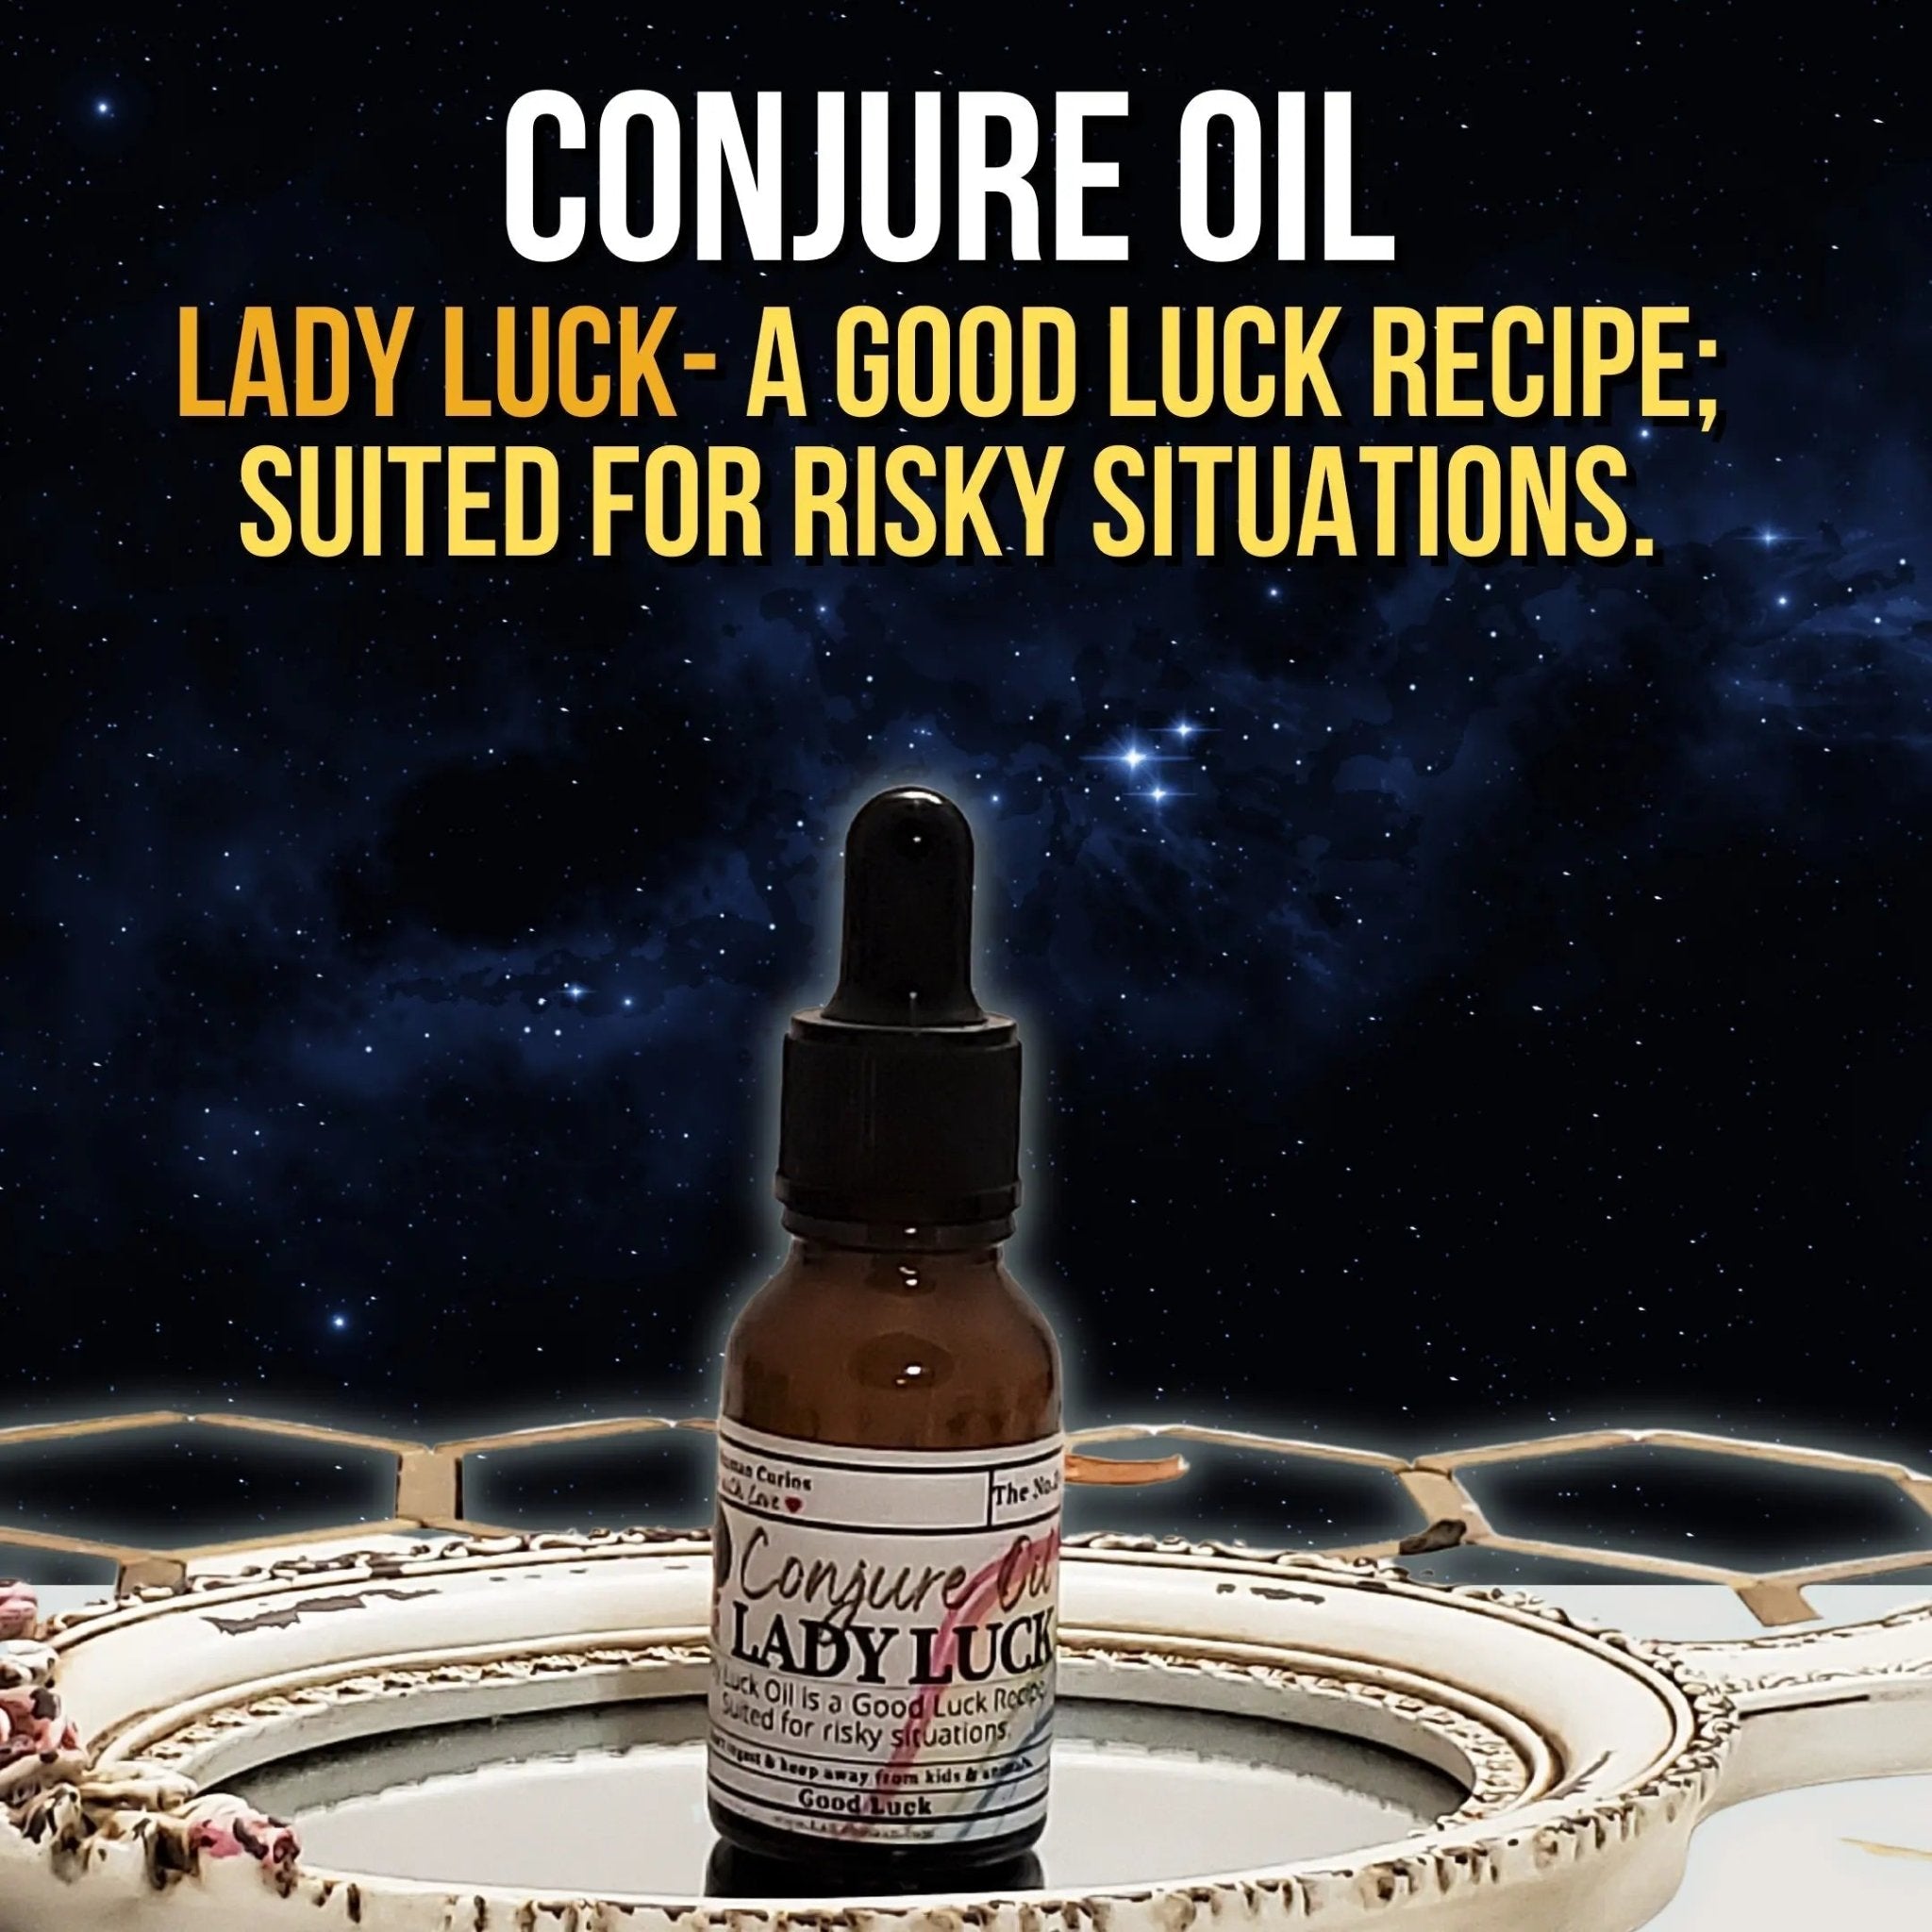  Lady Luck Oil | Conjure Oil | Good Luck | LAB Shaman by LABShaman sold by LABShaman